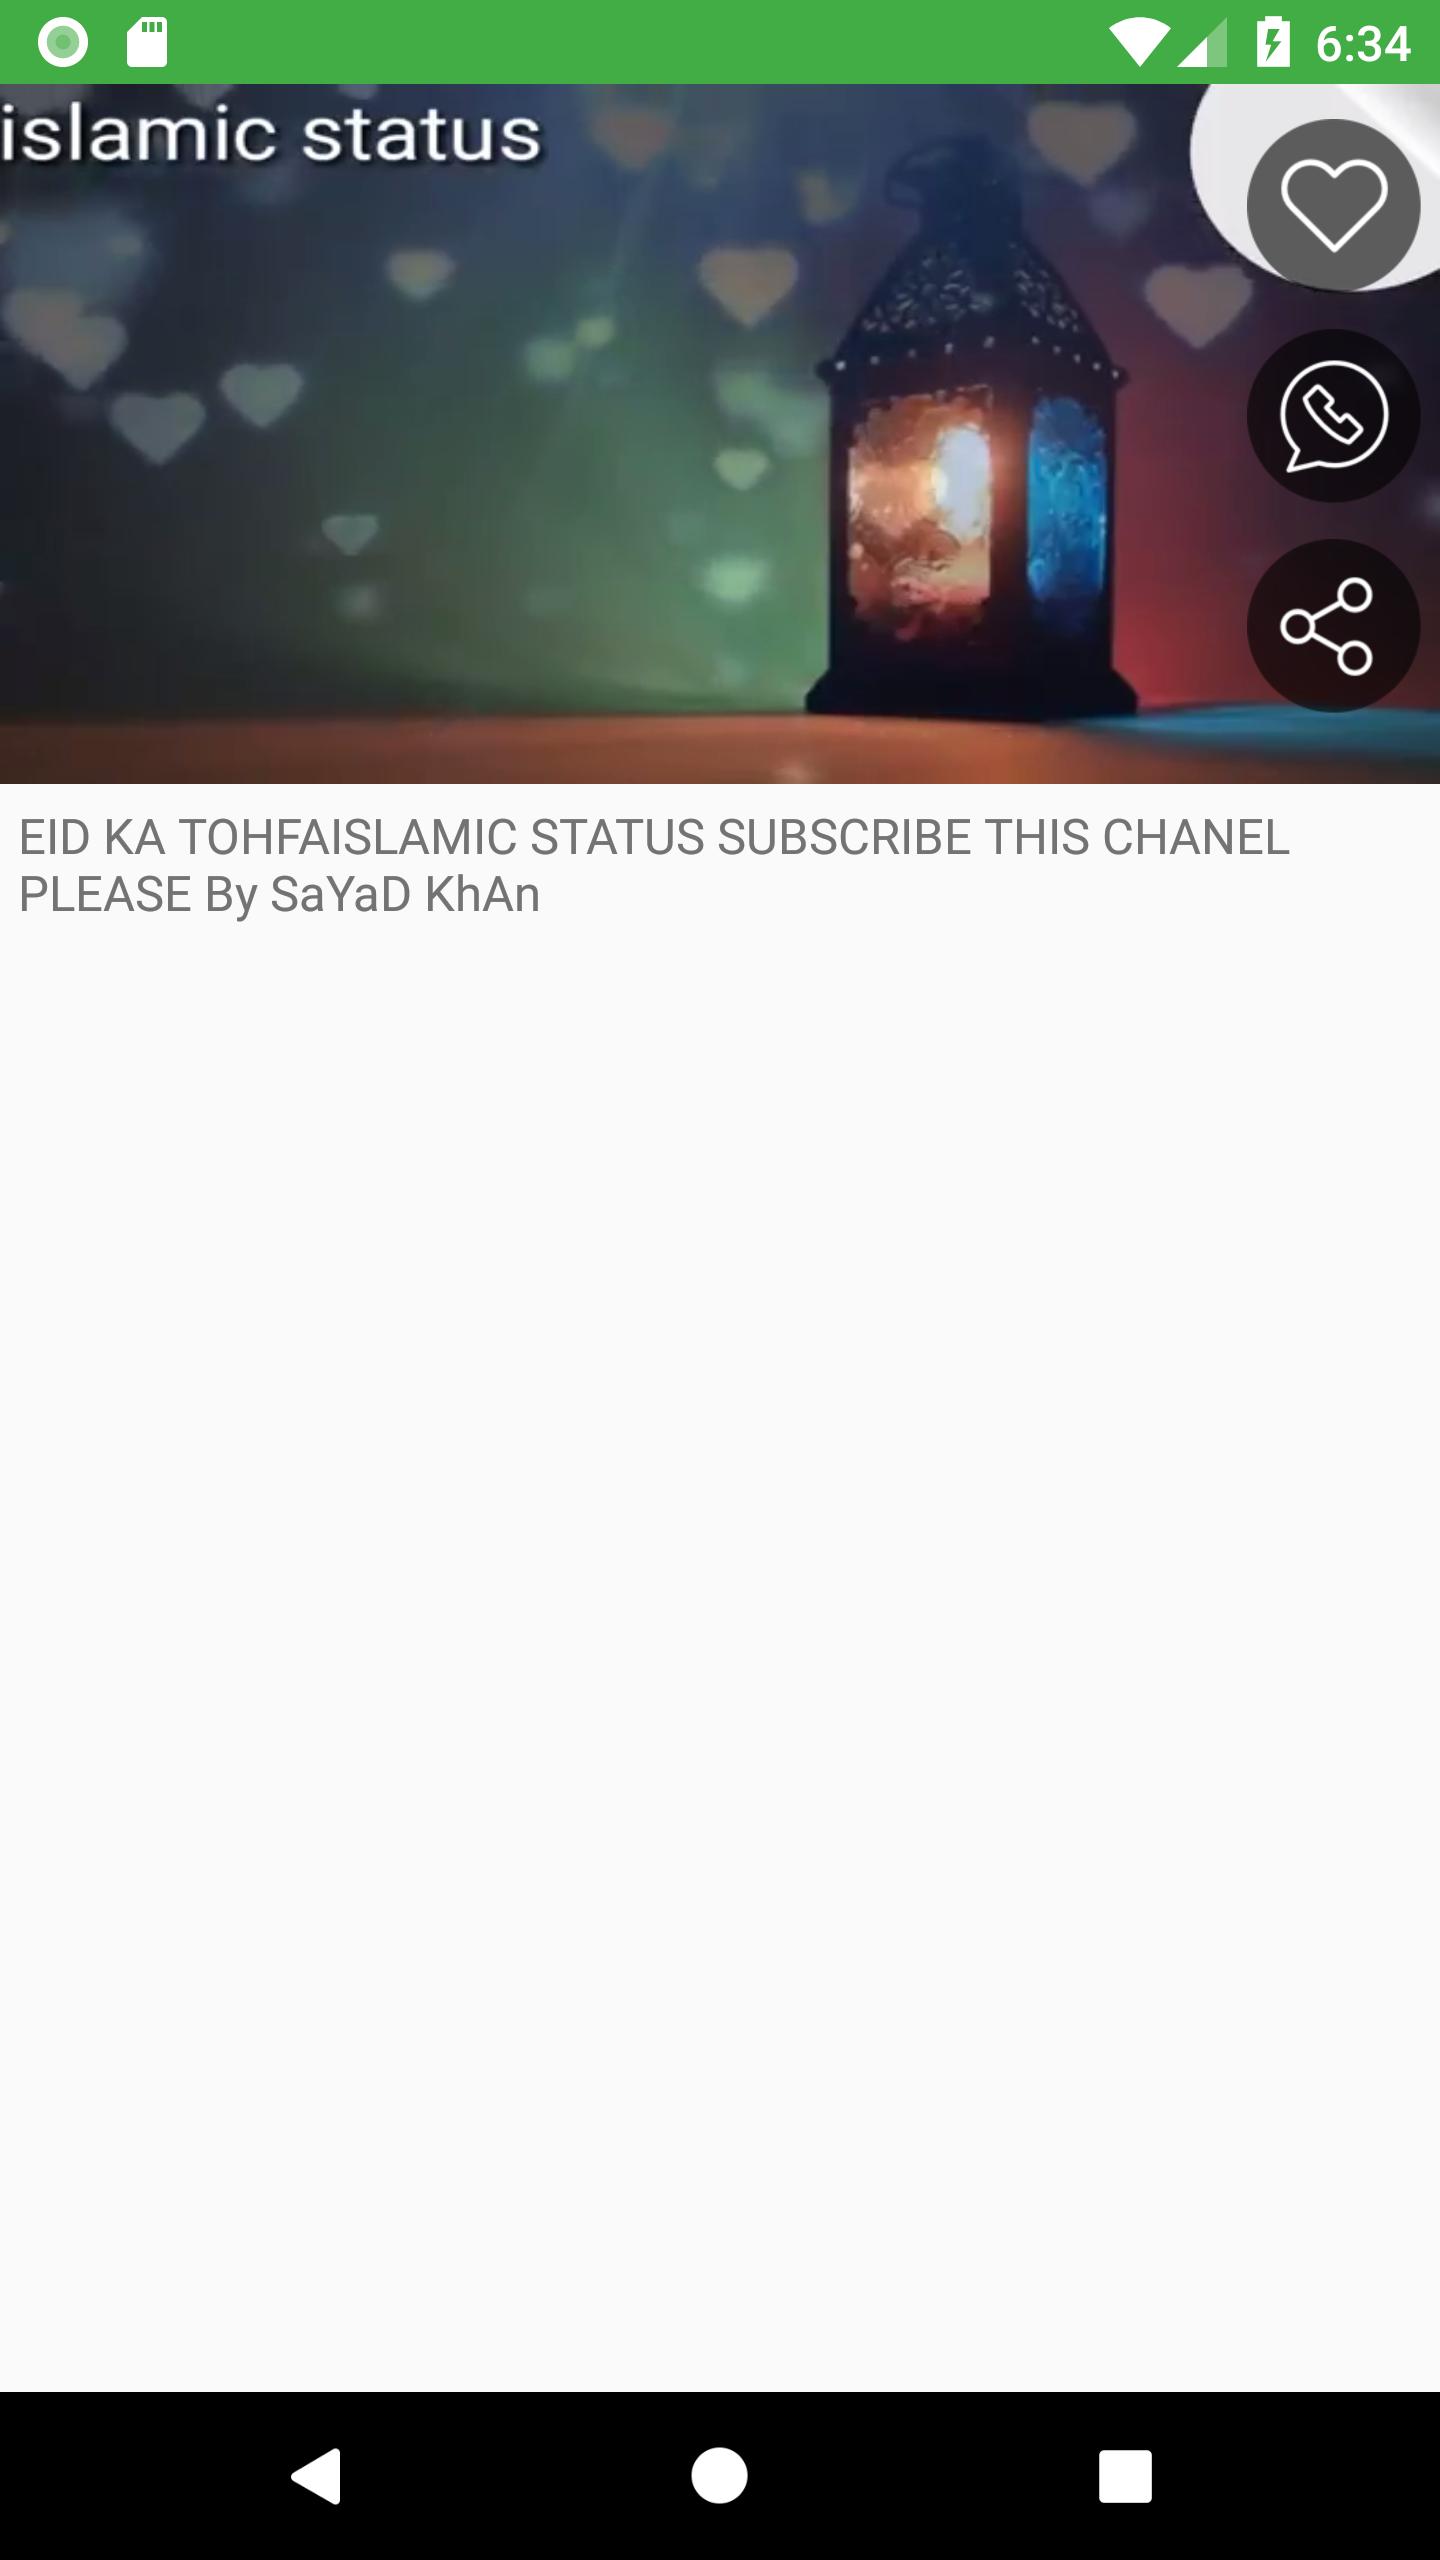  Islamic  Video  Status  for Android APK Download 